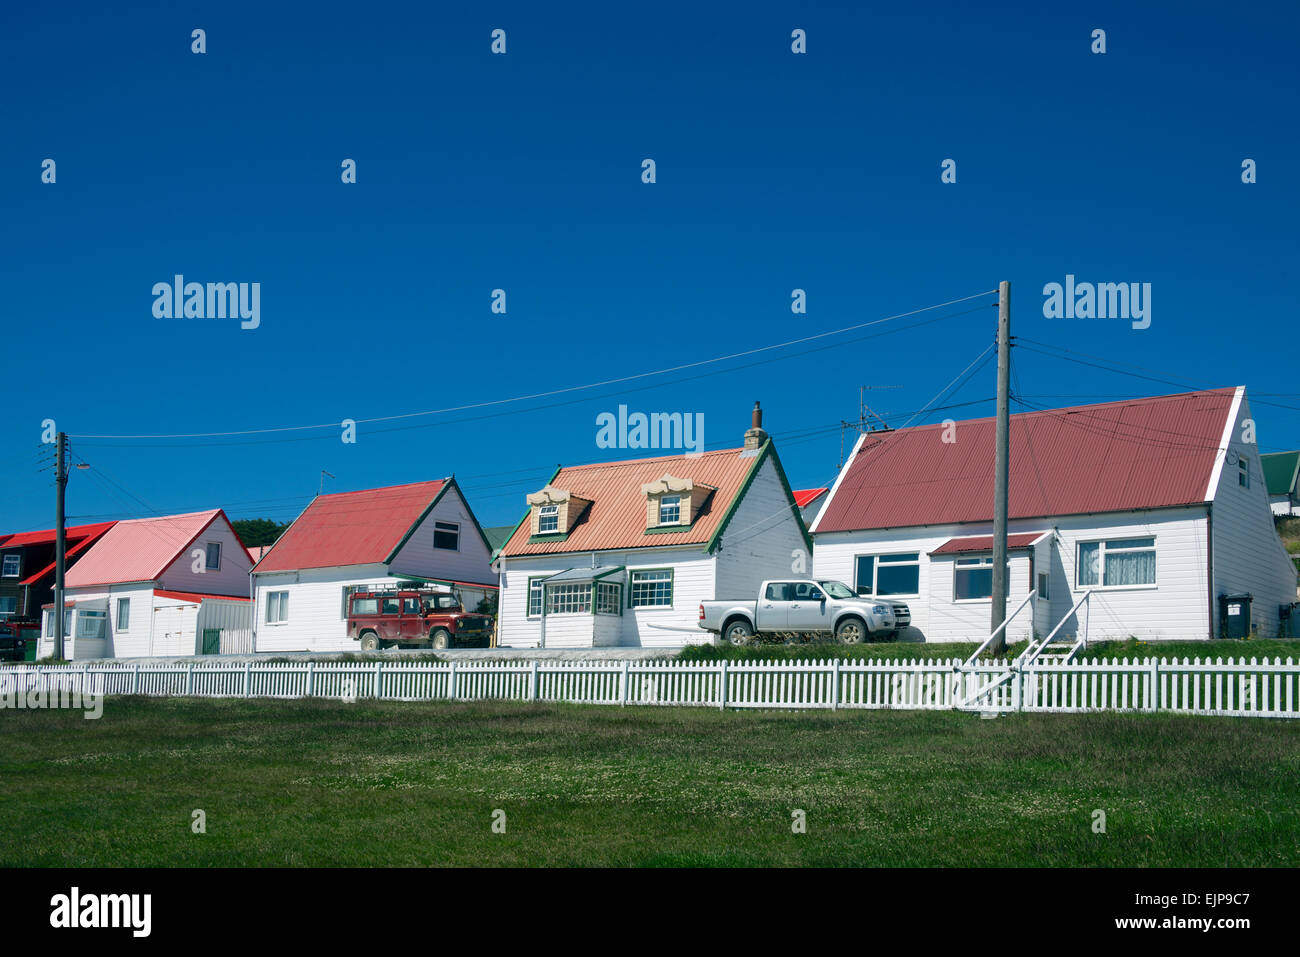 Row of colourful houses Port Stanley Falkland Islands Stock Photo